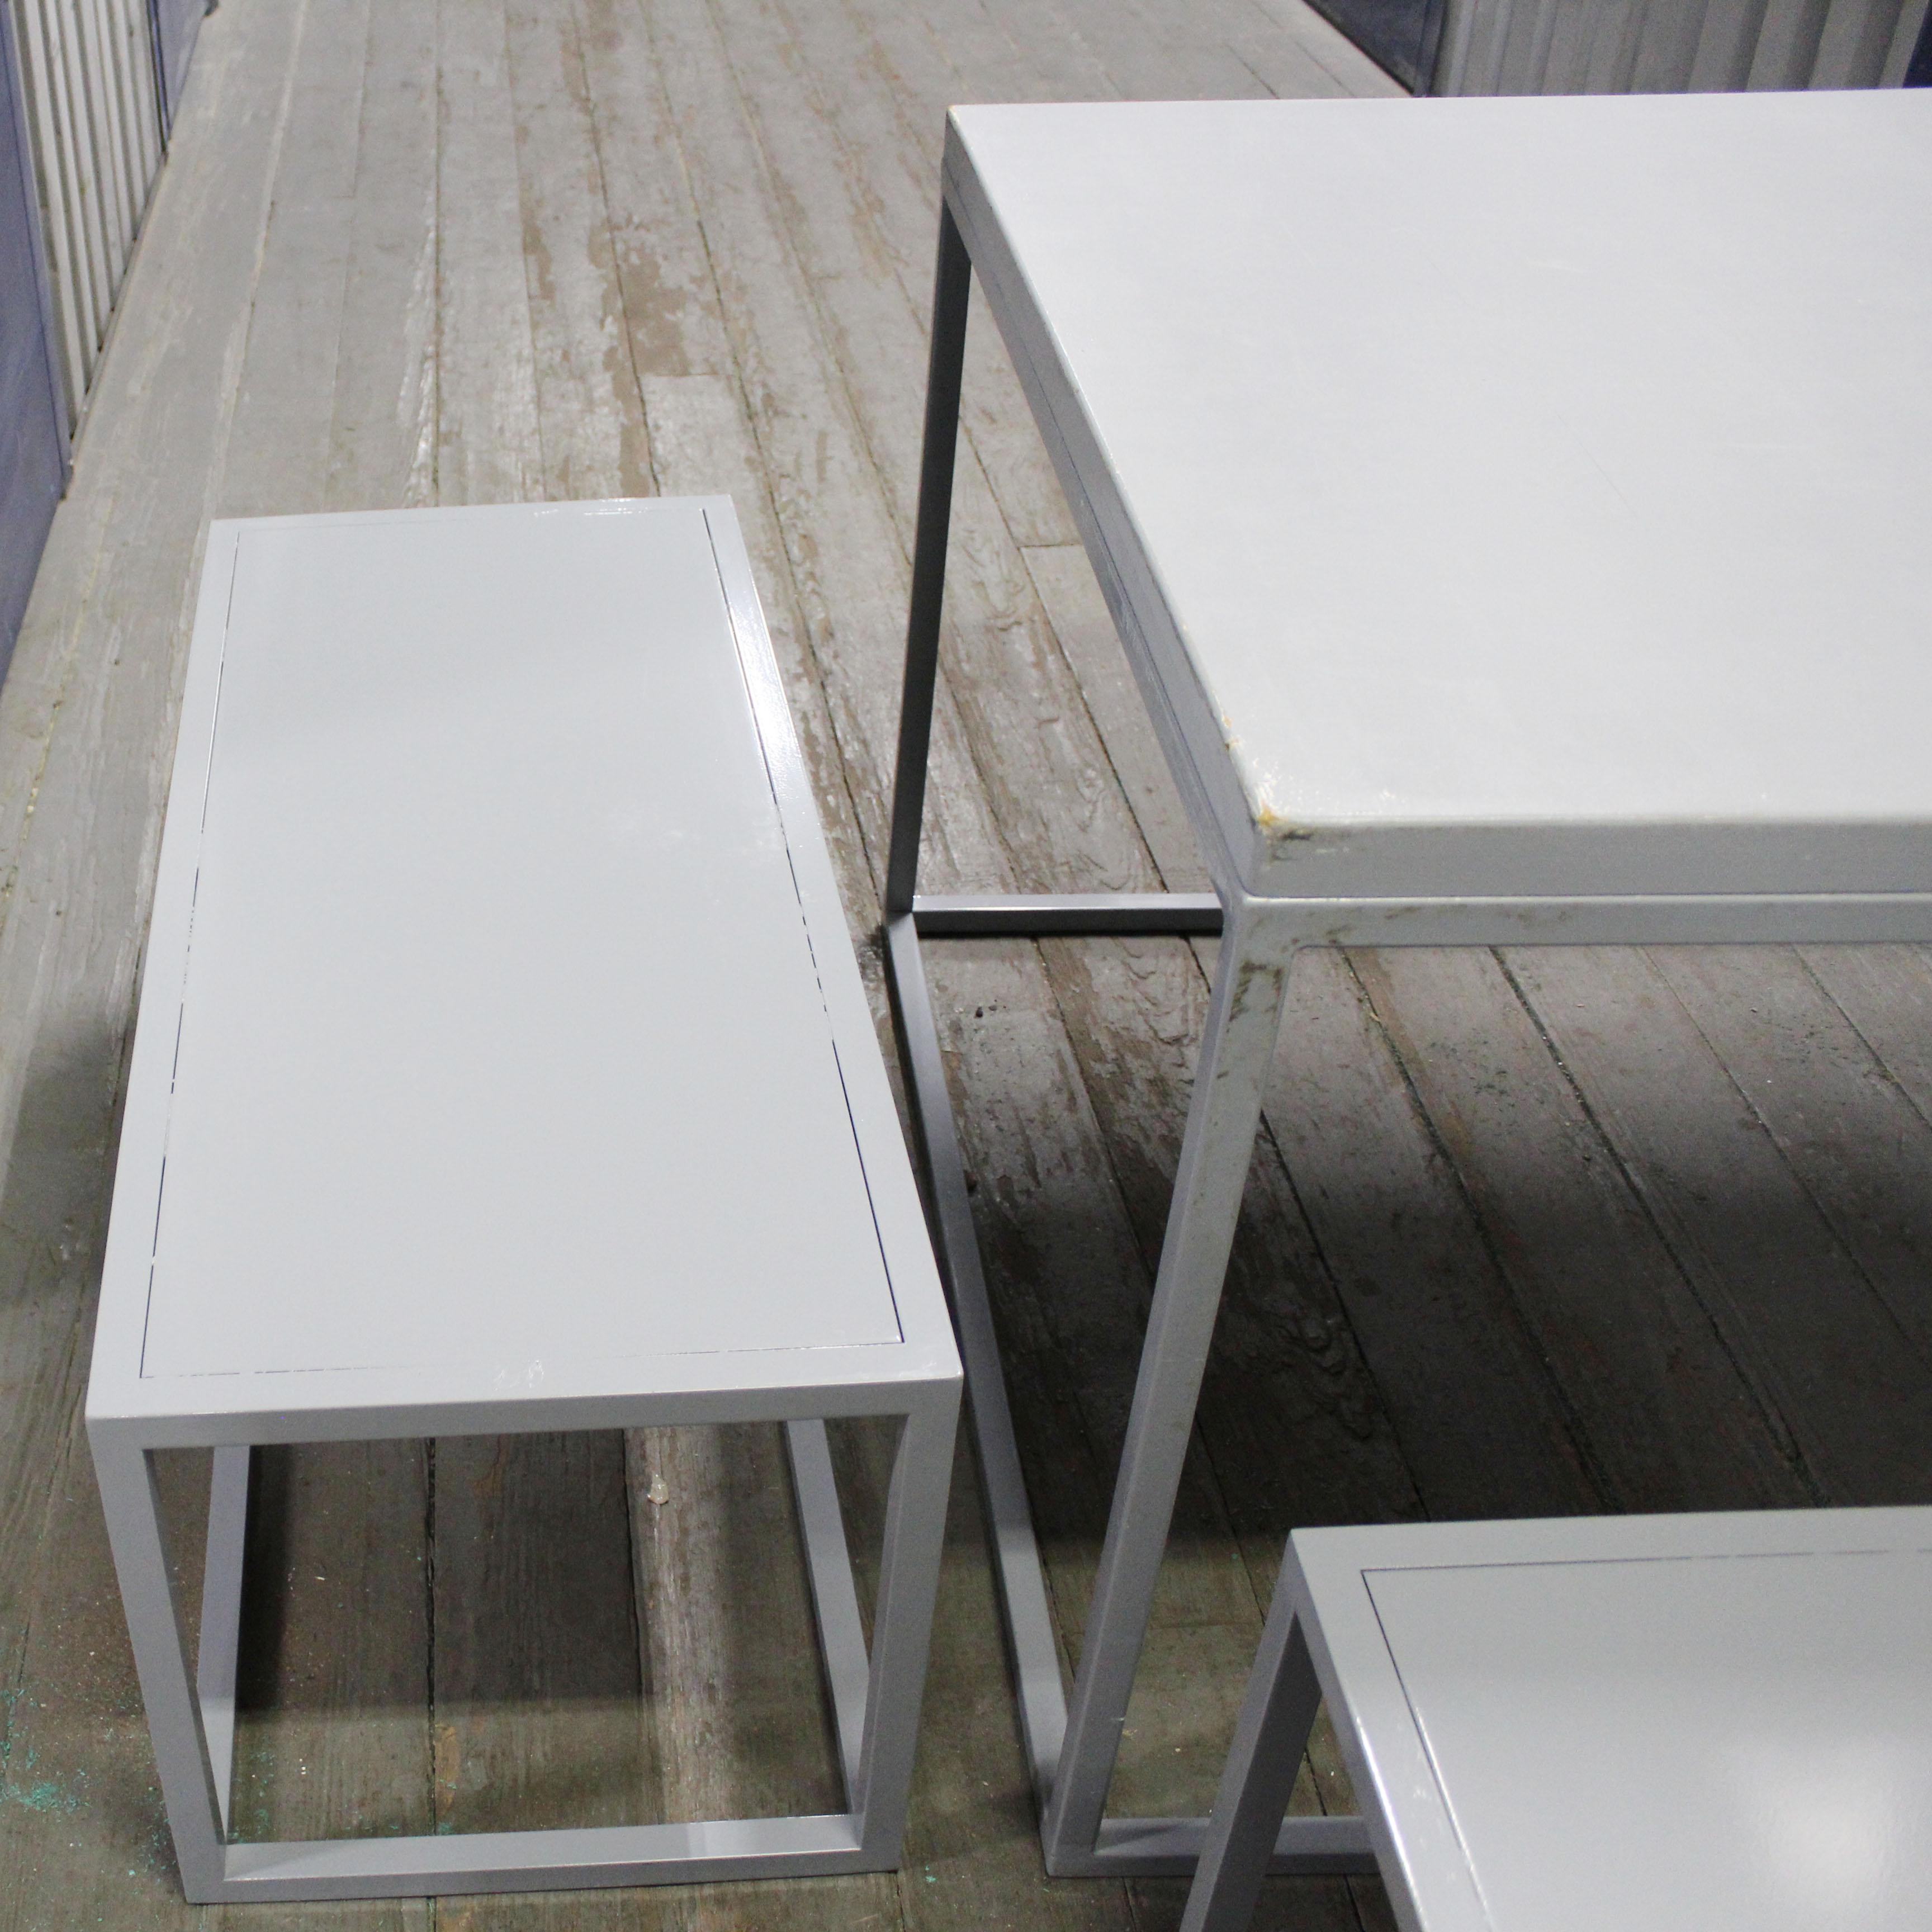 Minimalist Metal Judd Style Benched In Distressed Condition For Sale In New York, NY